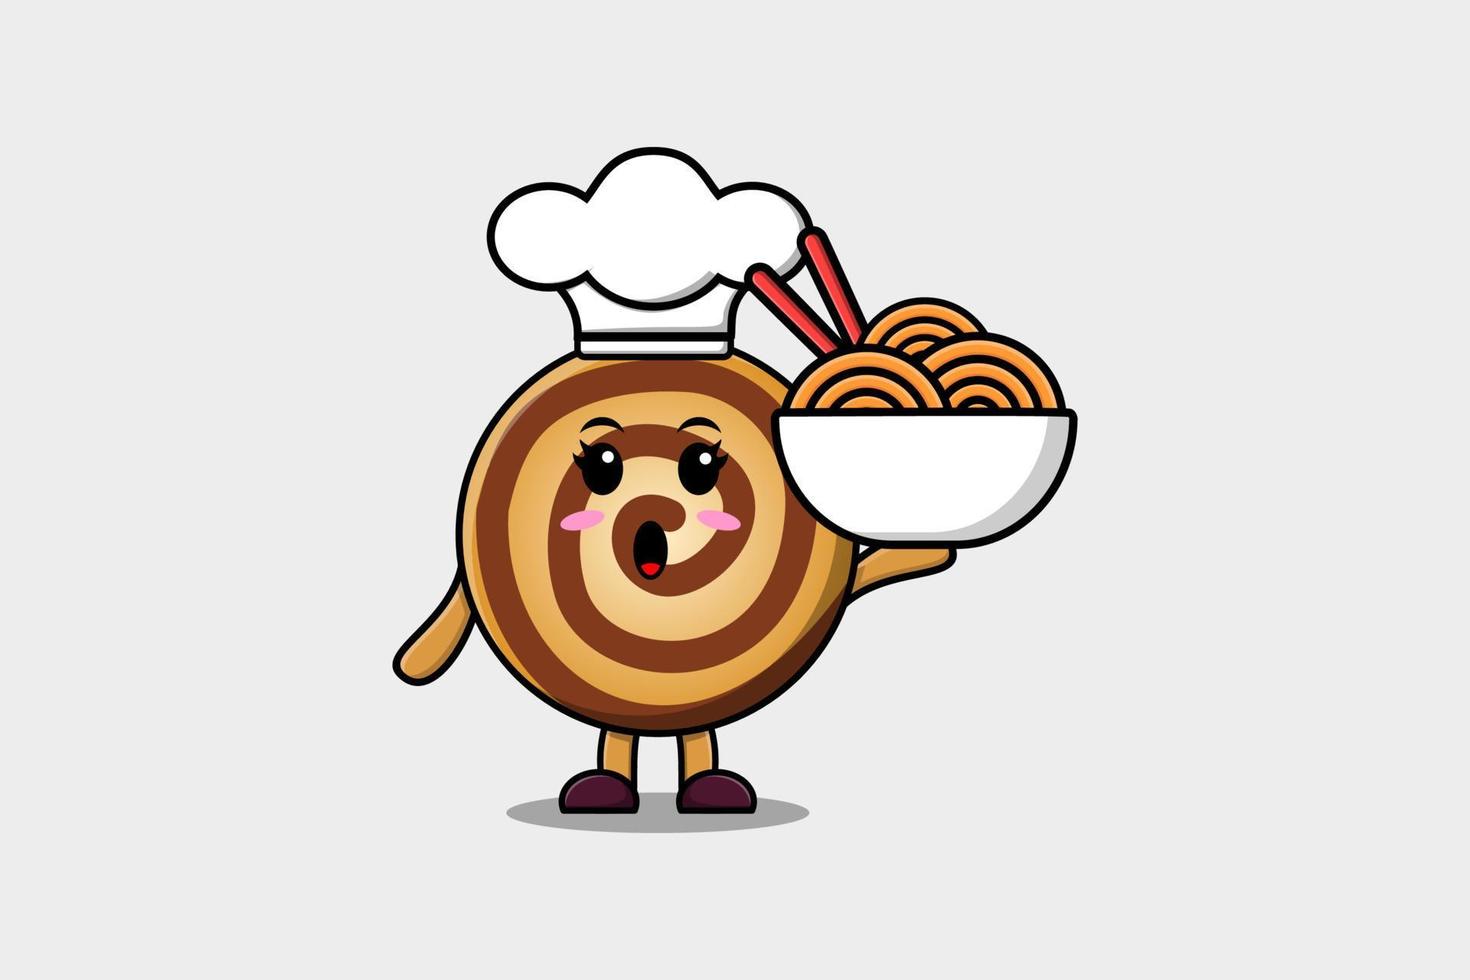 Cute cartoon Cookies chef holding noodles in bowl vector